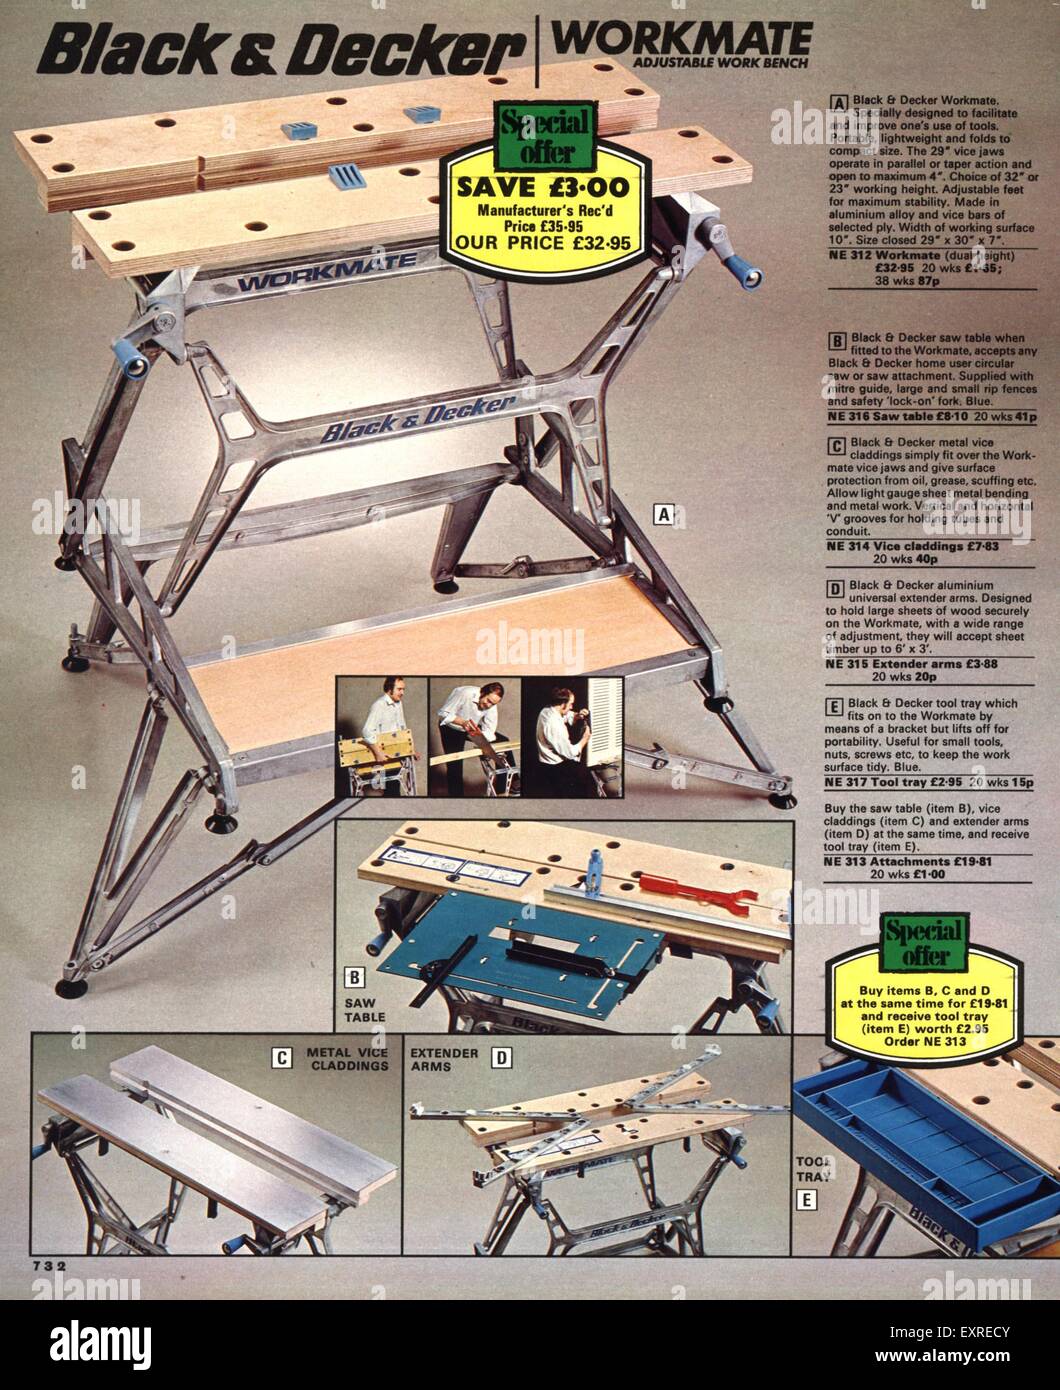 https://c8.alamy.com/comp/EXRECY/1970s-uk-black-and-decker-catalogue-brochure-plate-EXRECY.jpg